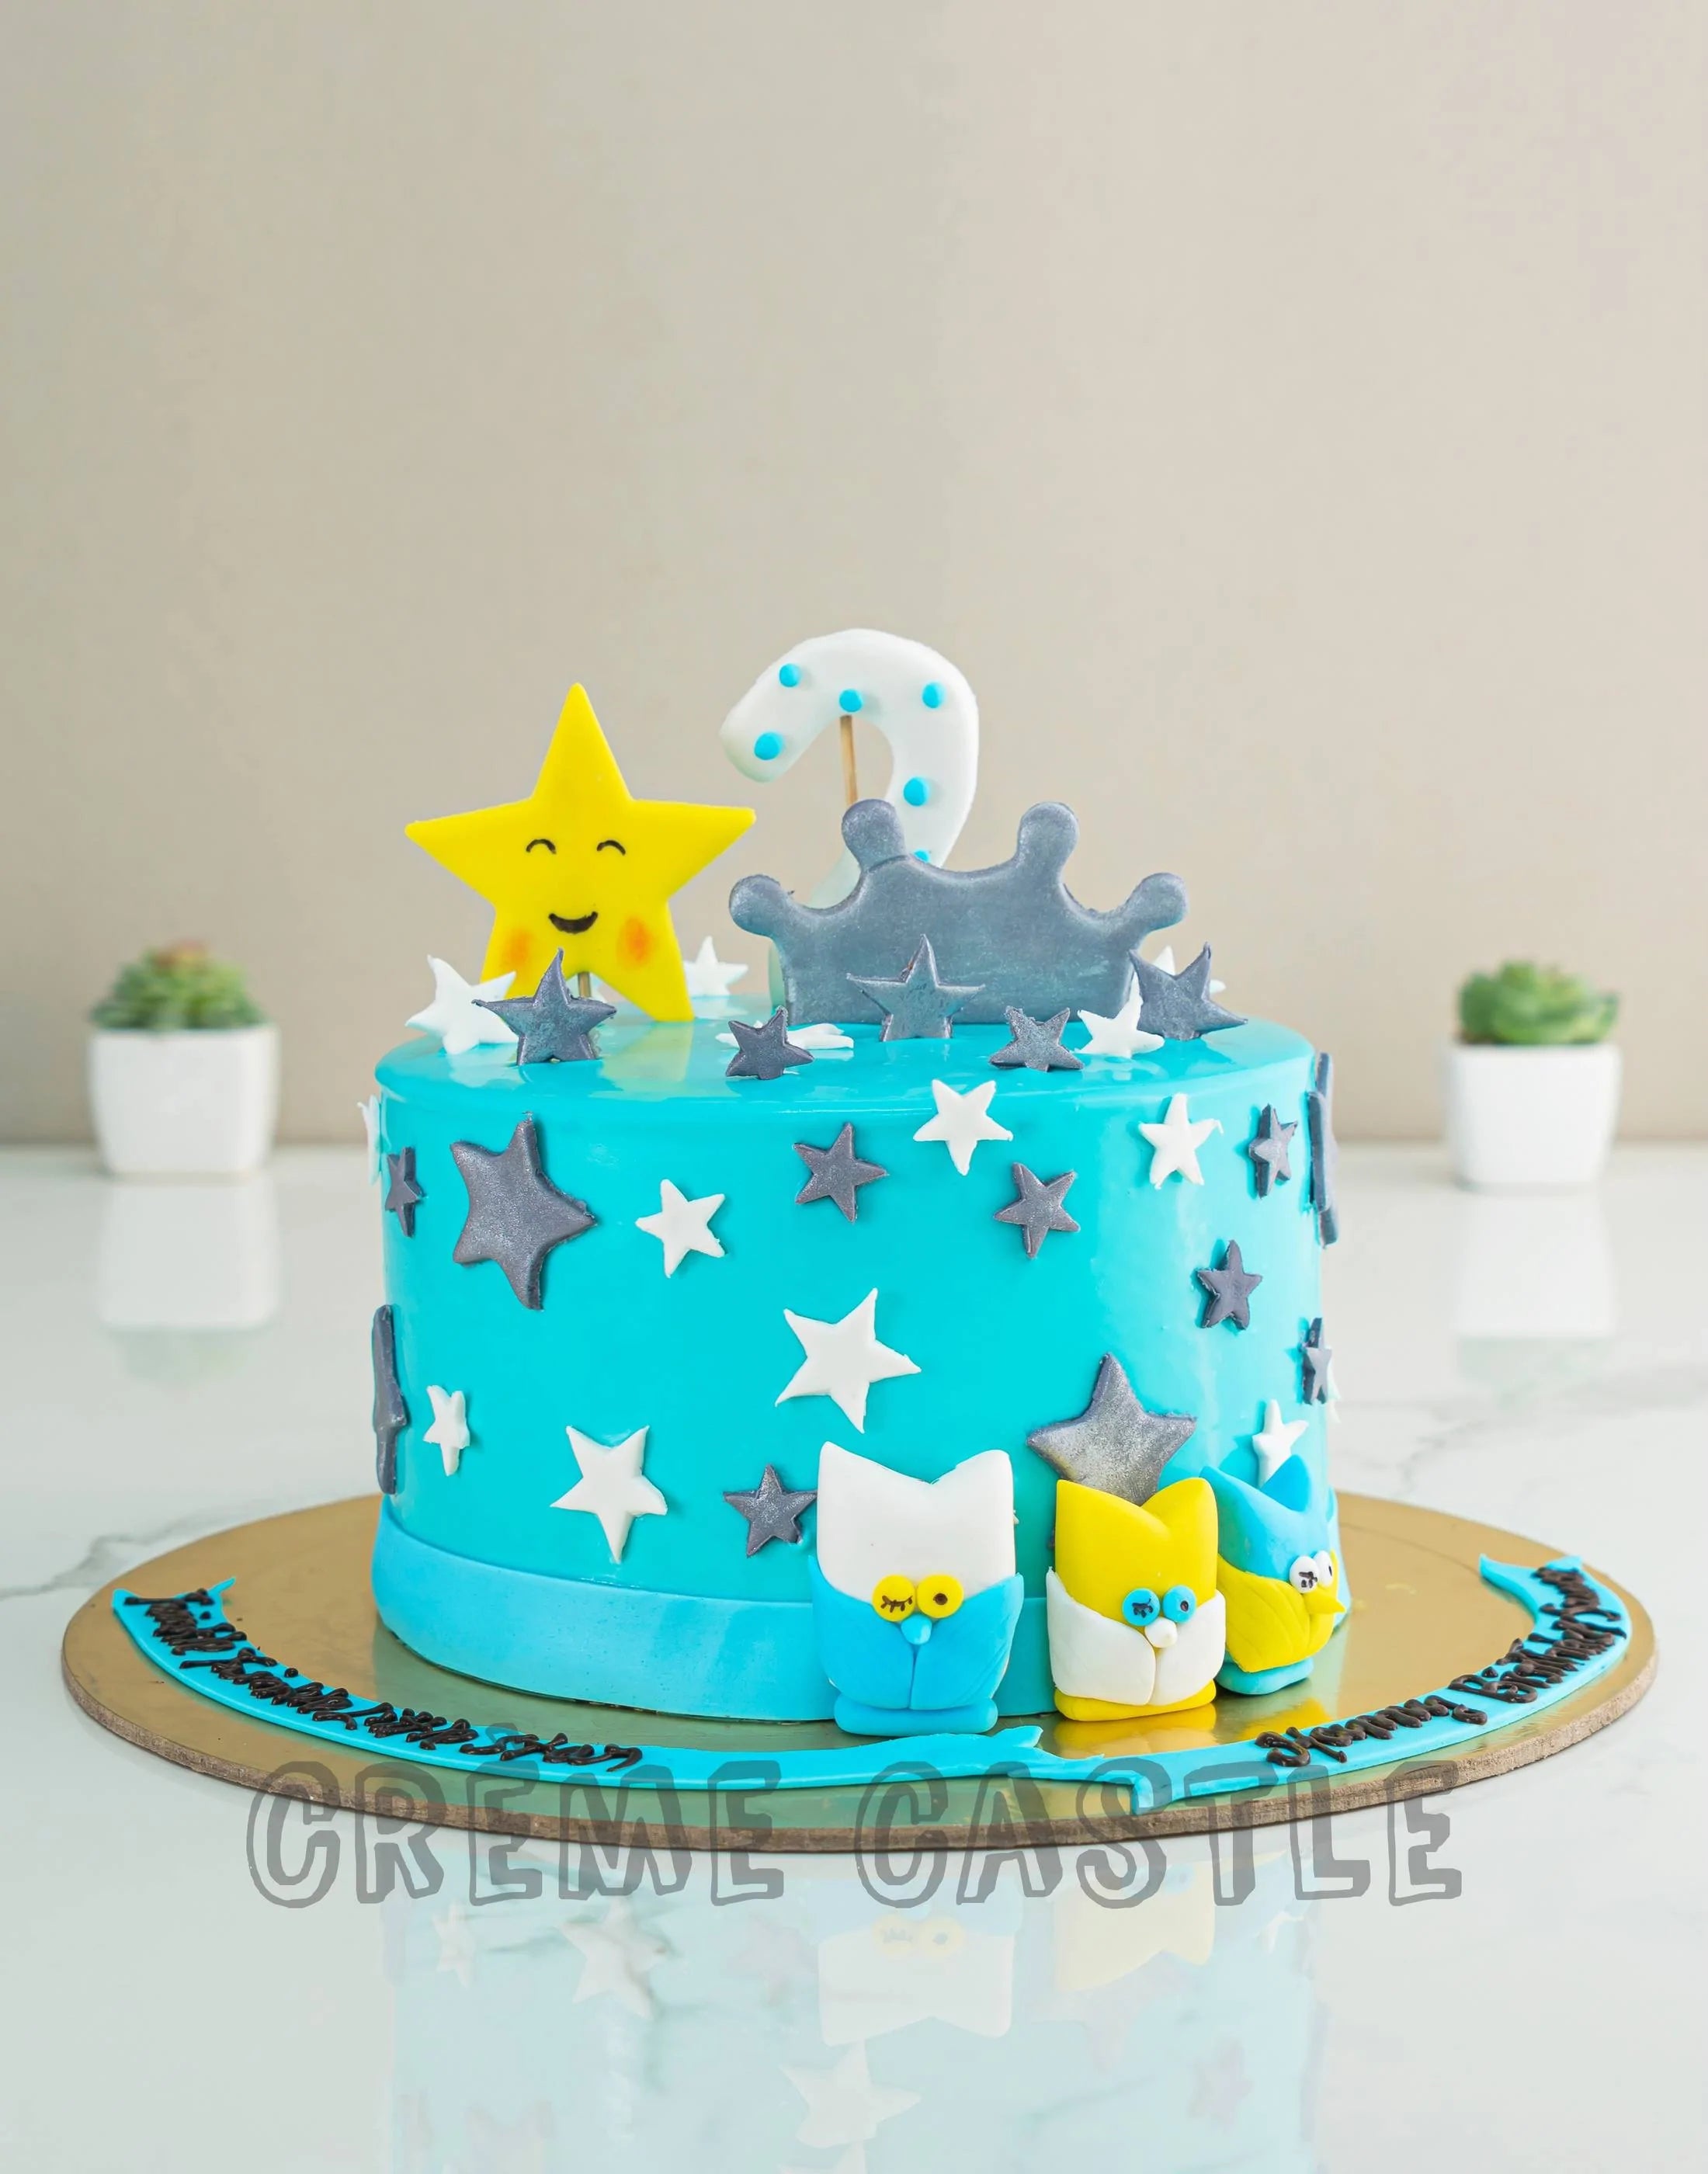 3D Foam Happy Birthday Cake Design Wall Hanging for Decoration|Blue|Boys  Design : Amazon.in: Home & Kitchen